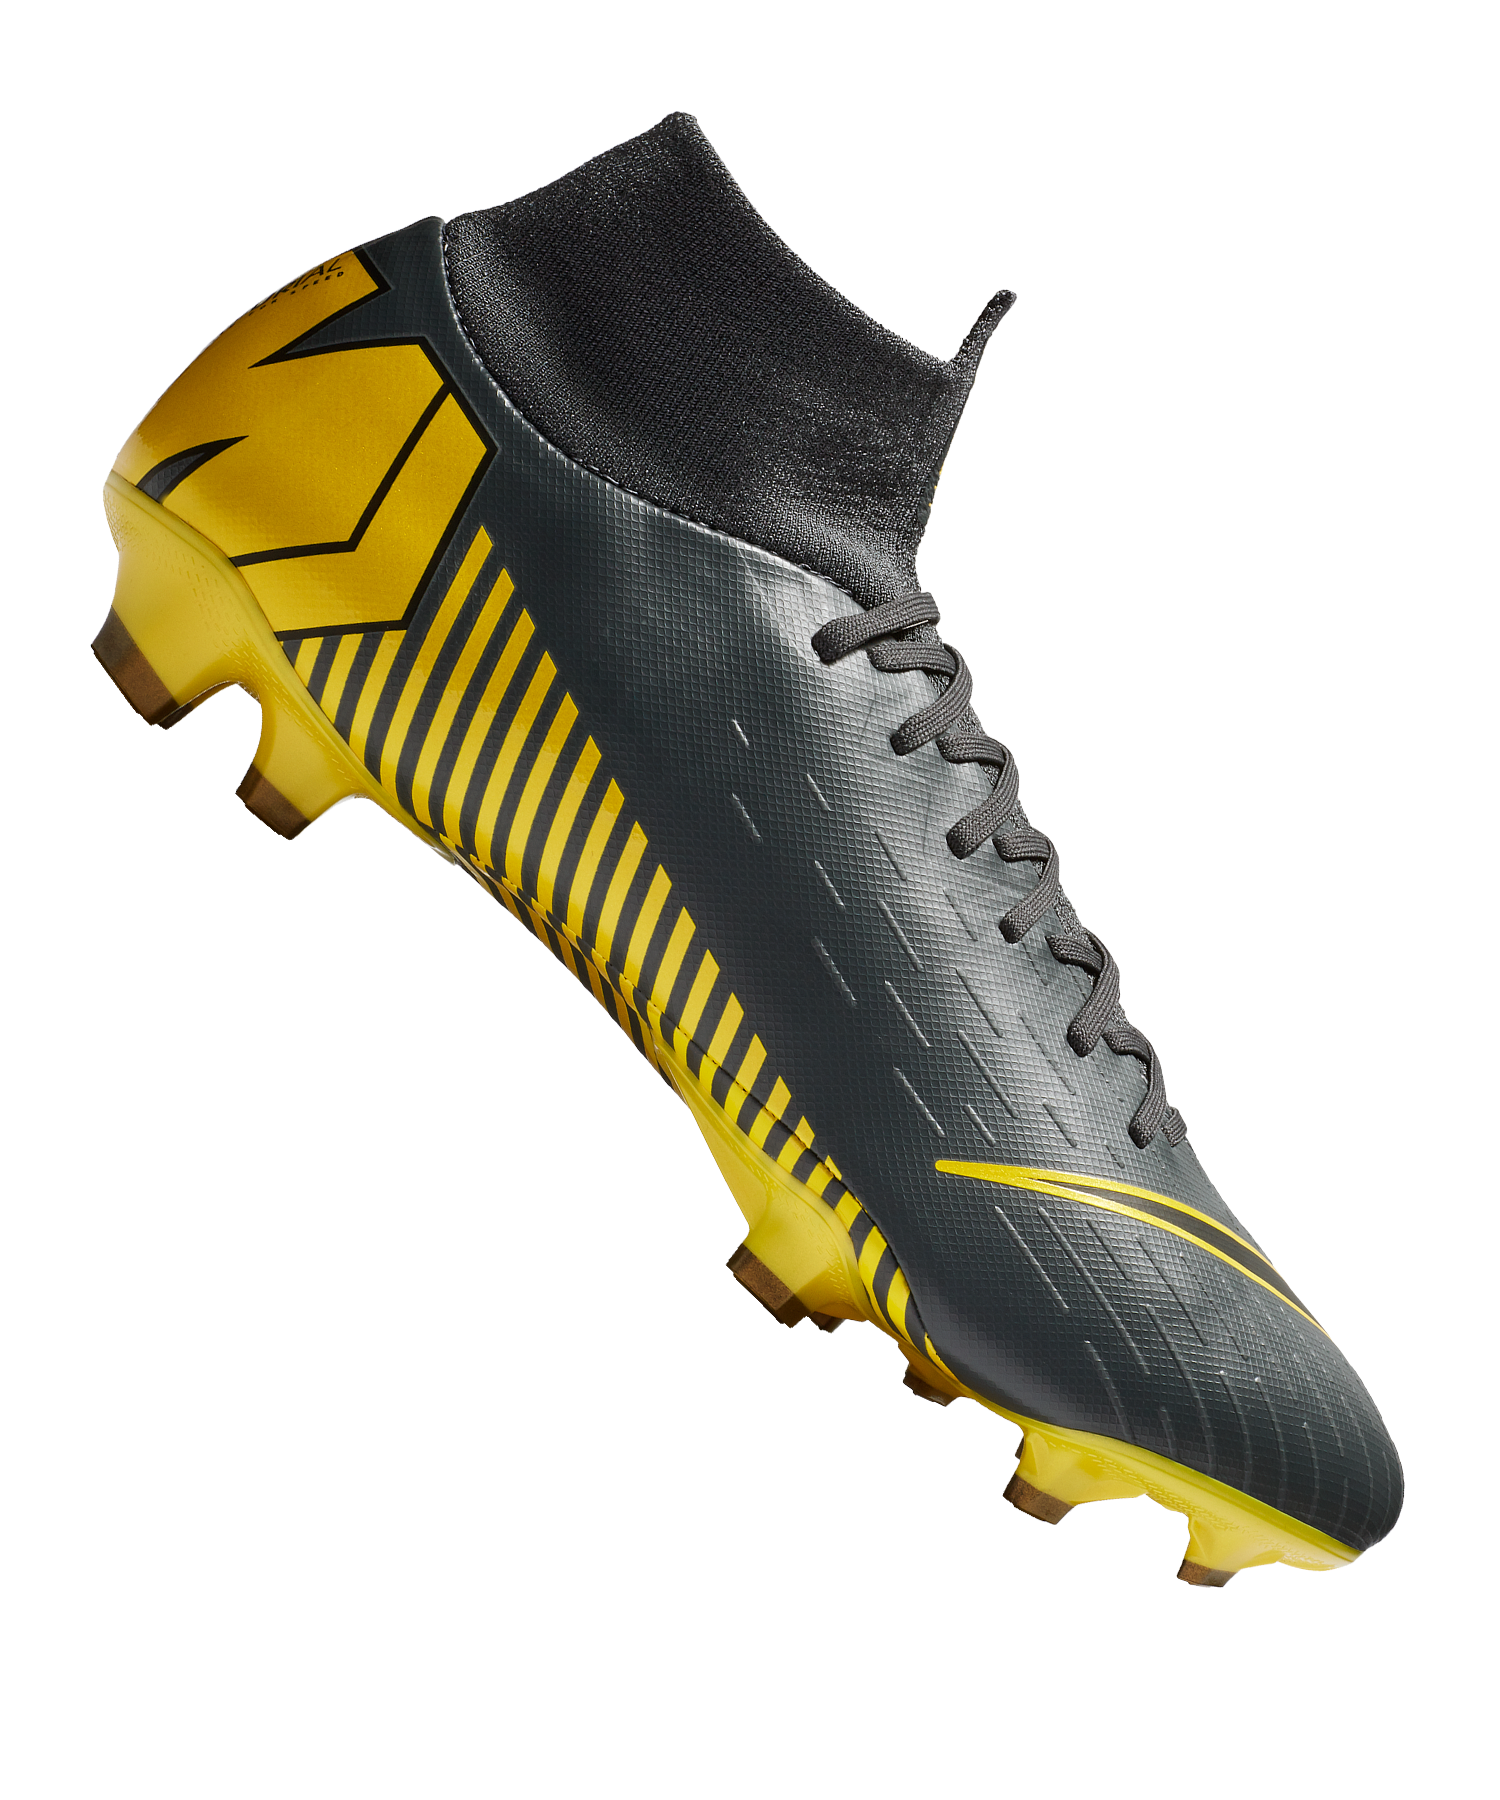 Nike Mercurial Superfly VI Academy FG MG Pro Direct Rugby